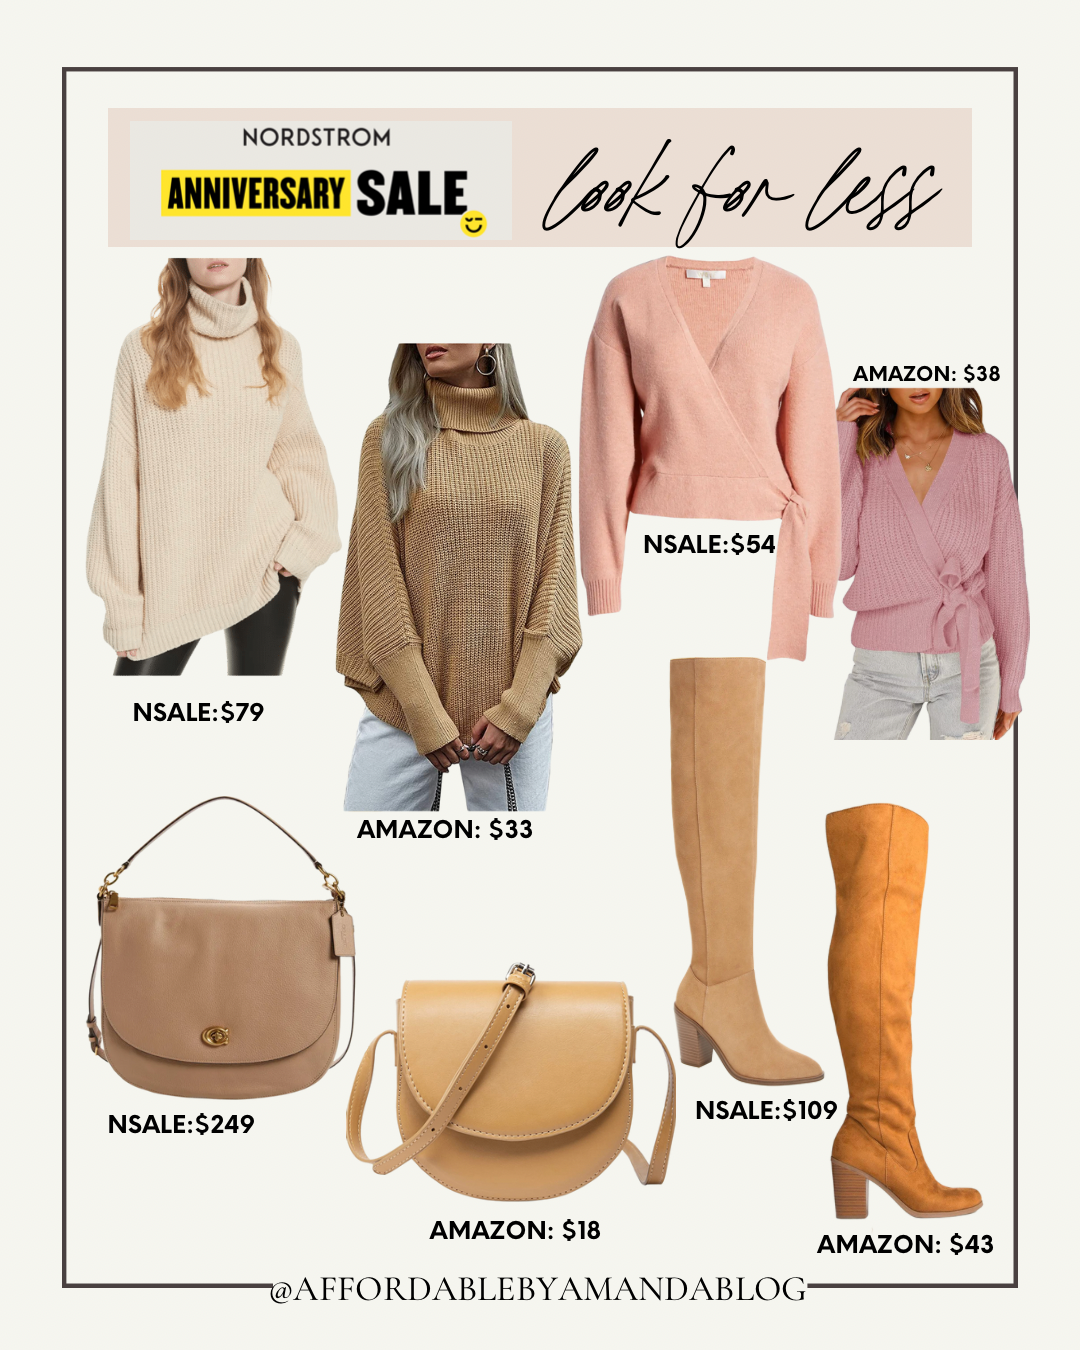  Nordstrom Anniversary Sale 2022 Fall Fashion Finds - Nordstrom Anniversary Sale Picks Get the Look for Less on Amazon